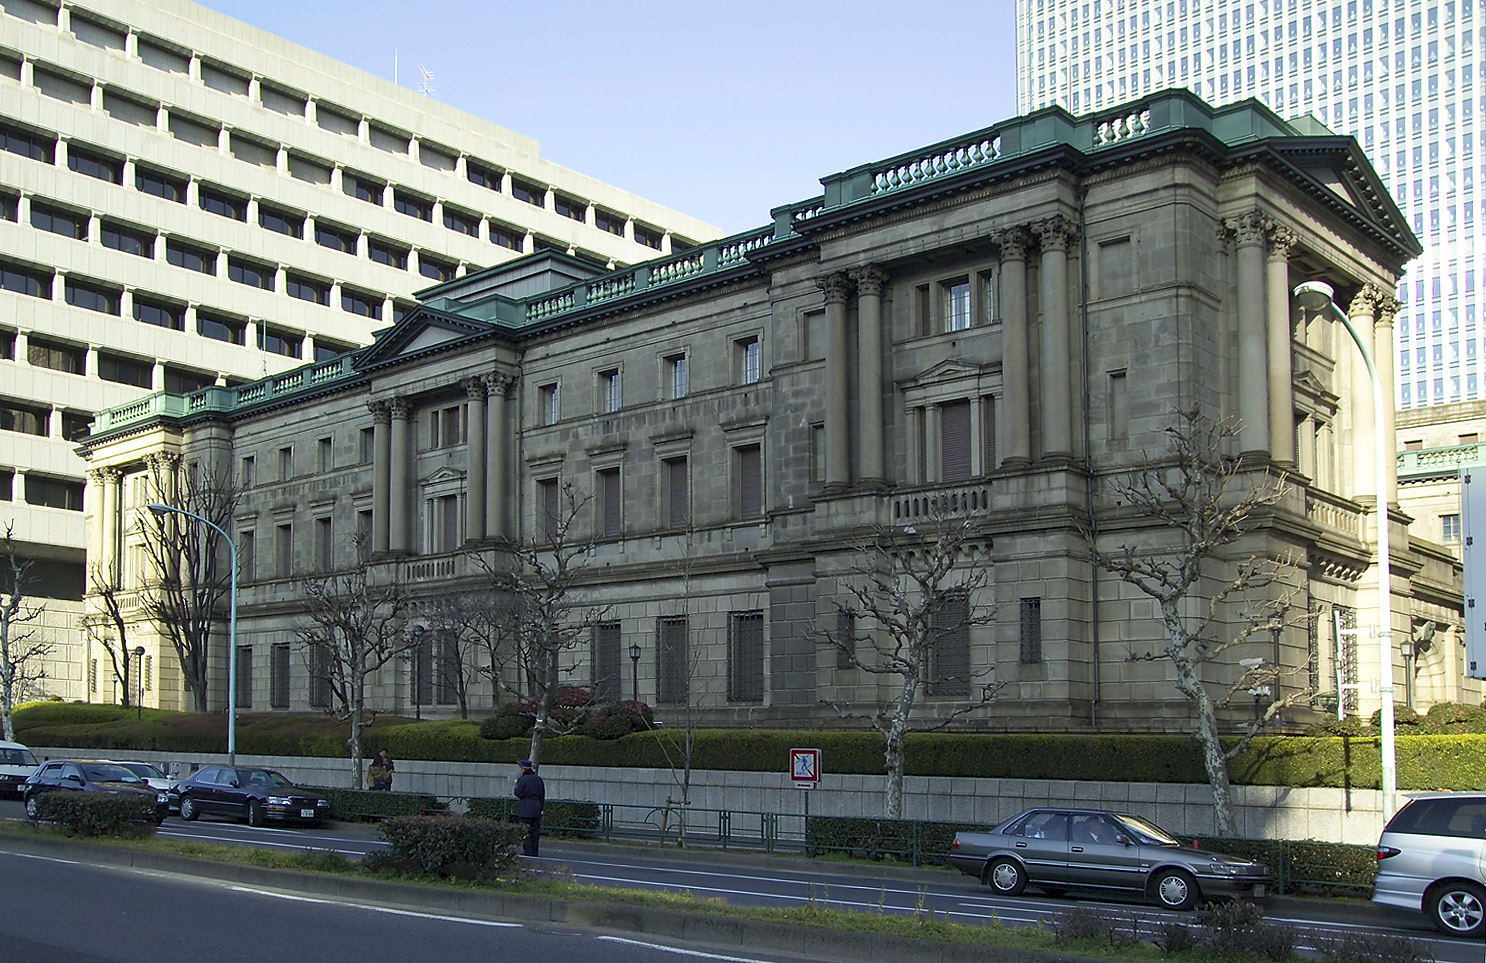 BOJ joins peers to fight coronavirus fallout, ramps up risky asset buying